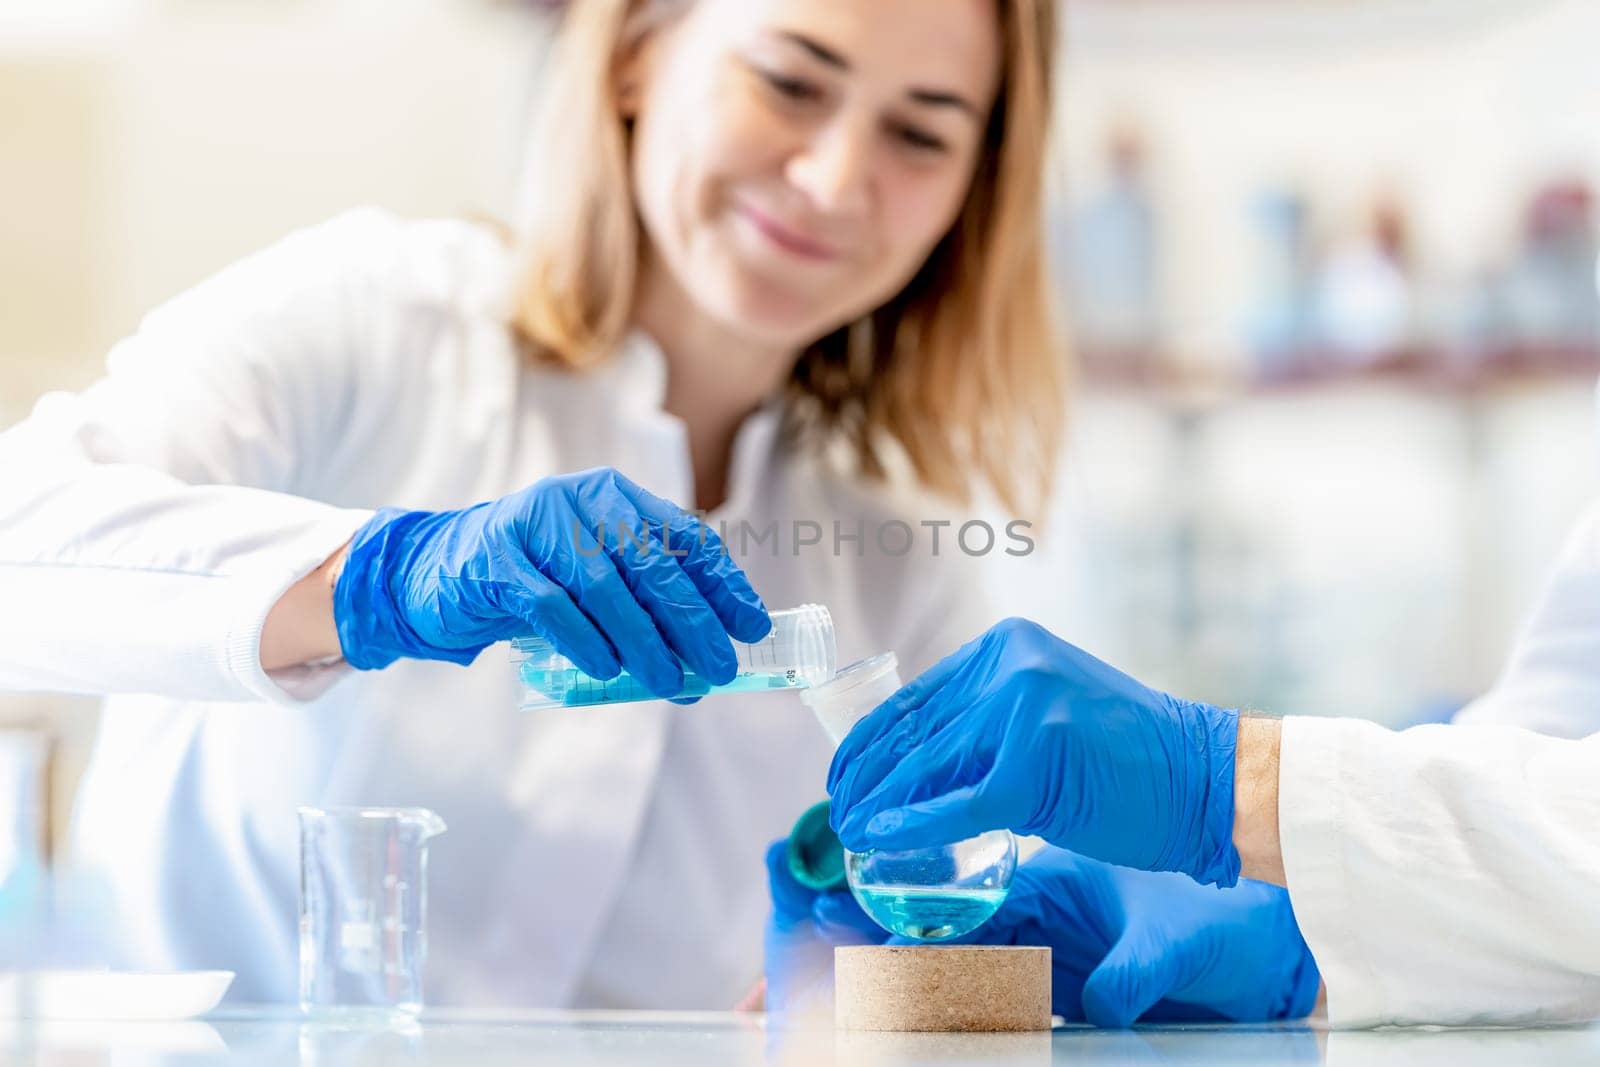 Invent a new drug and substance in biochemical laboratory by Edophoto